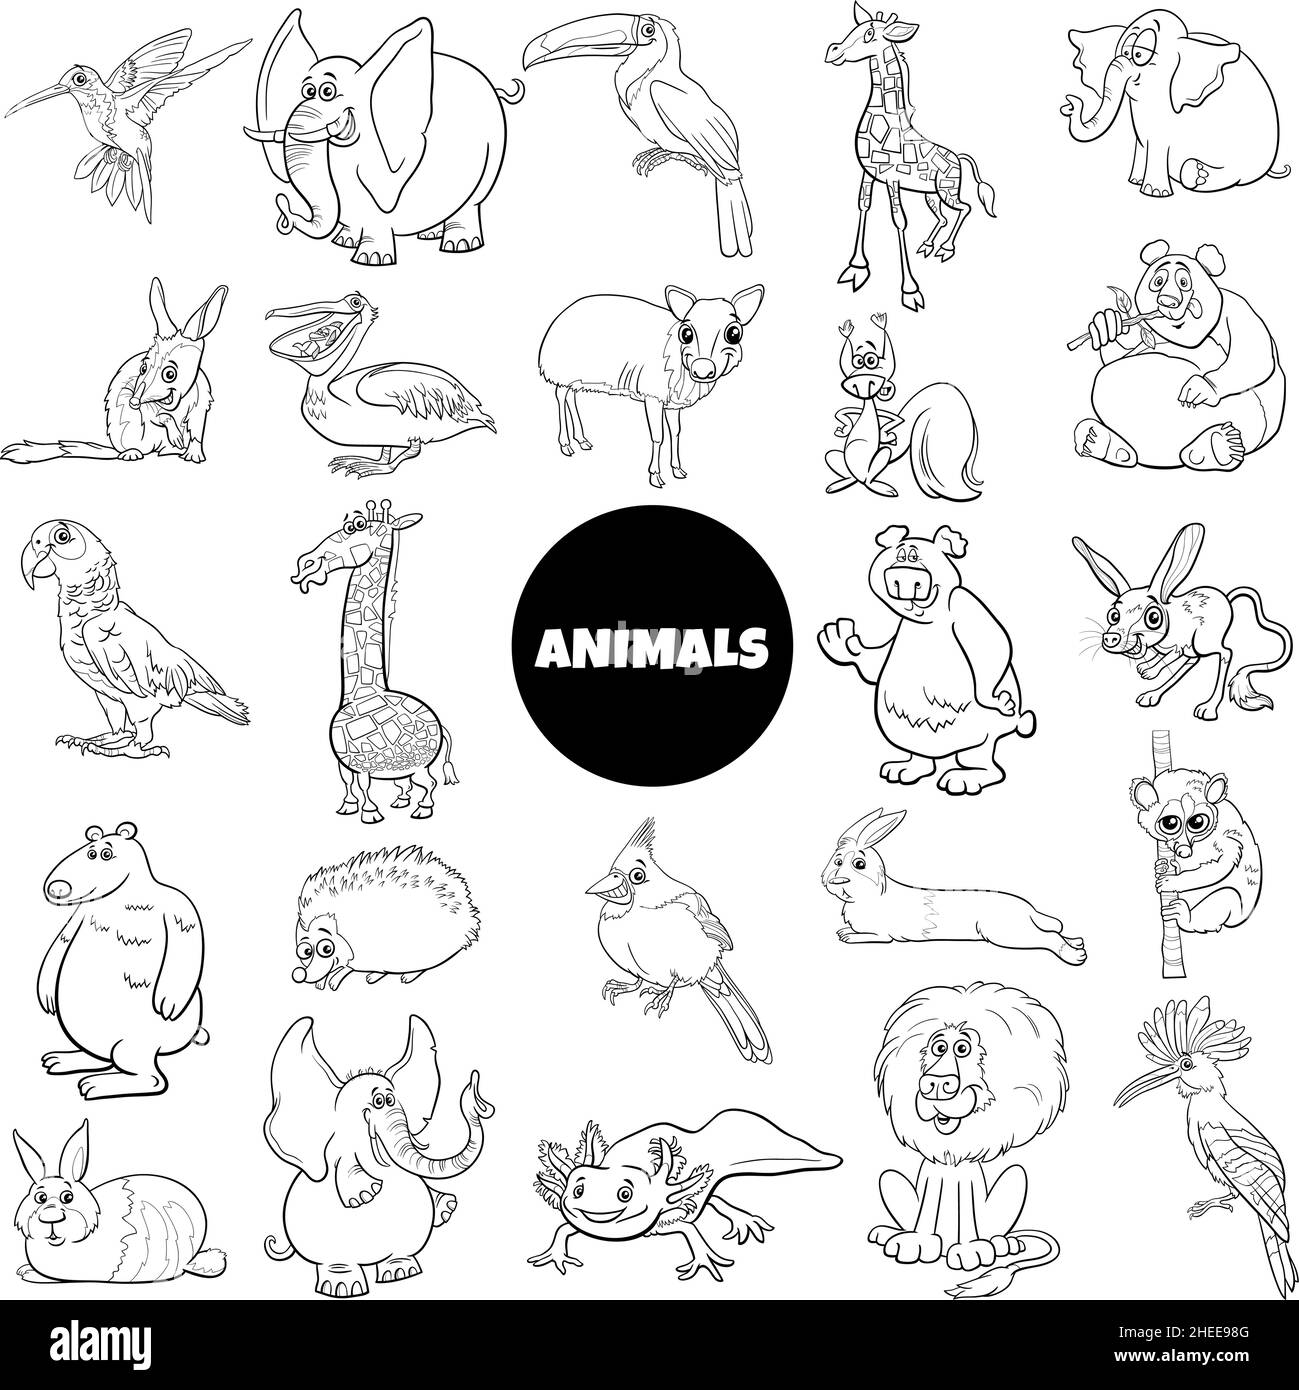 Black and white cartoon illustration of wild animal species characters big set Stock Vector